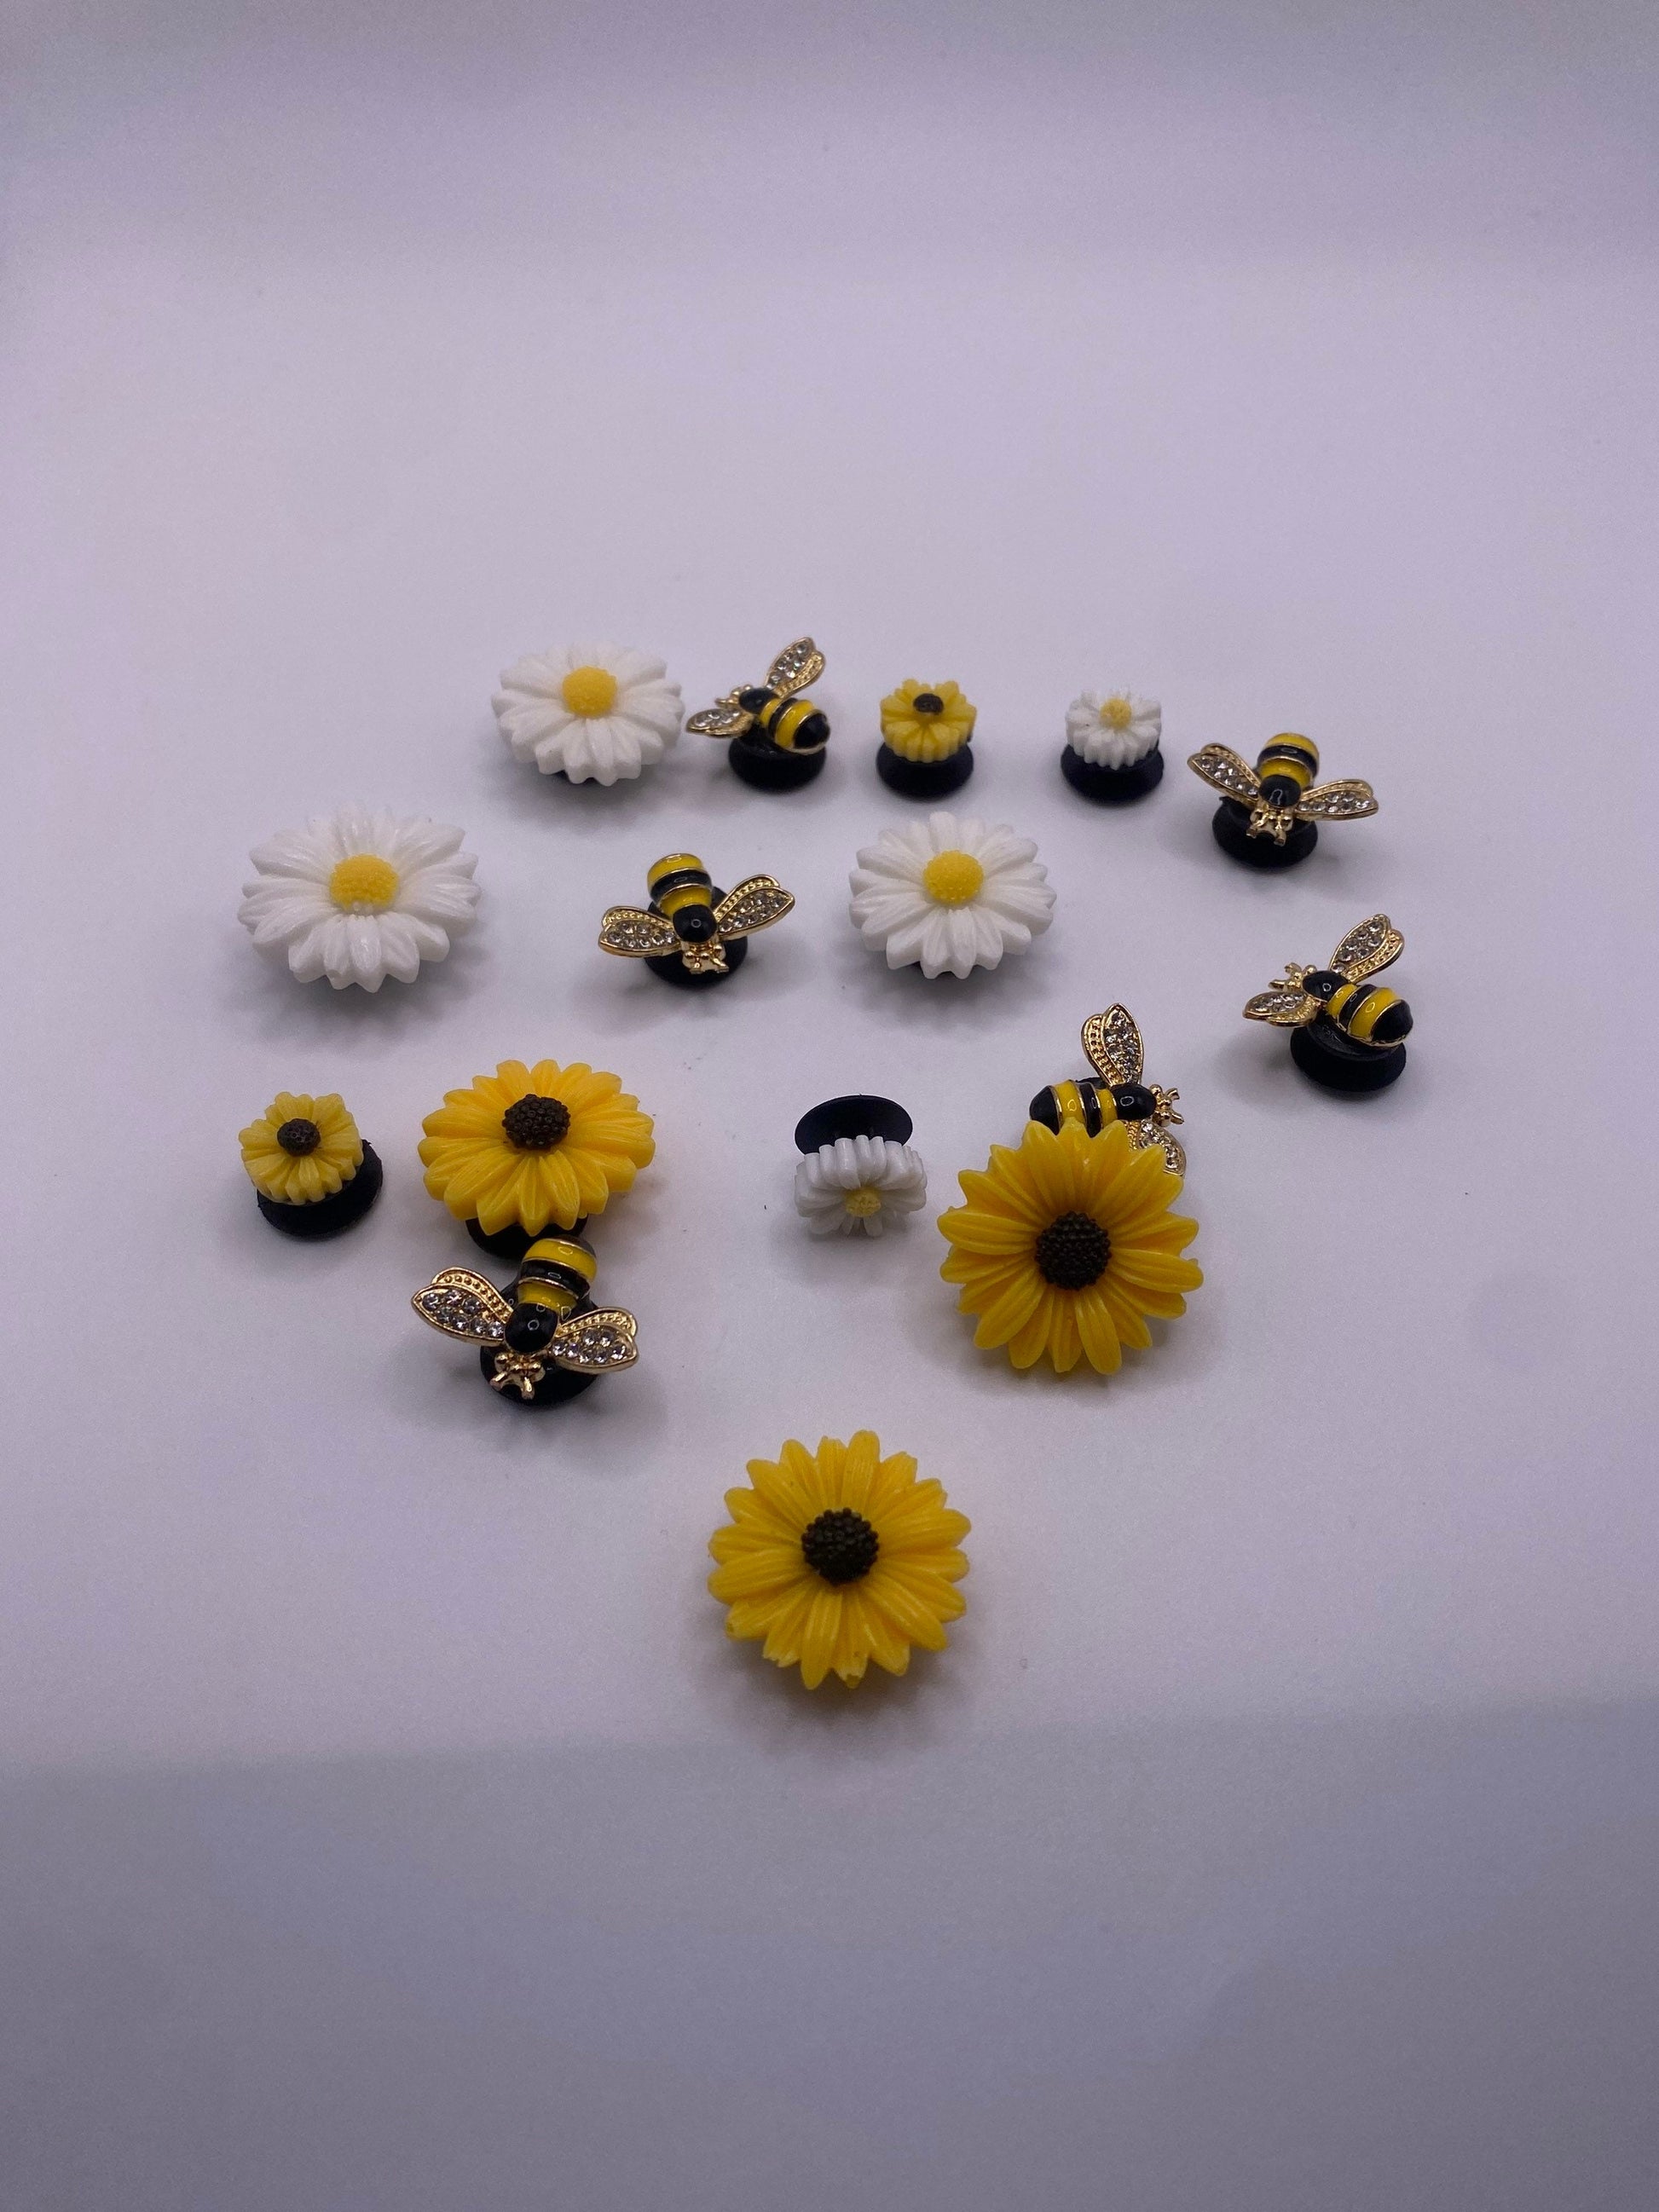 Sunflower and jewel bees shoe charm sets